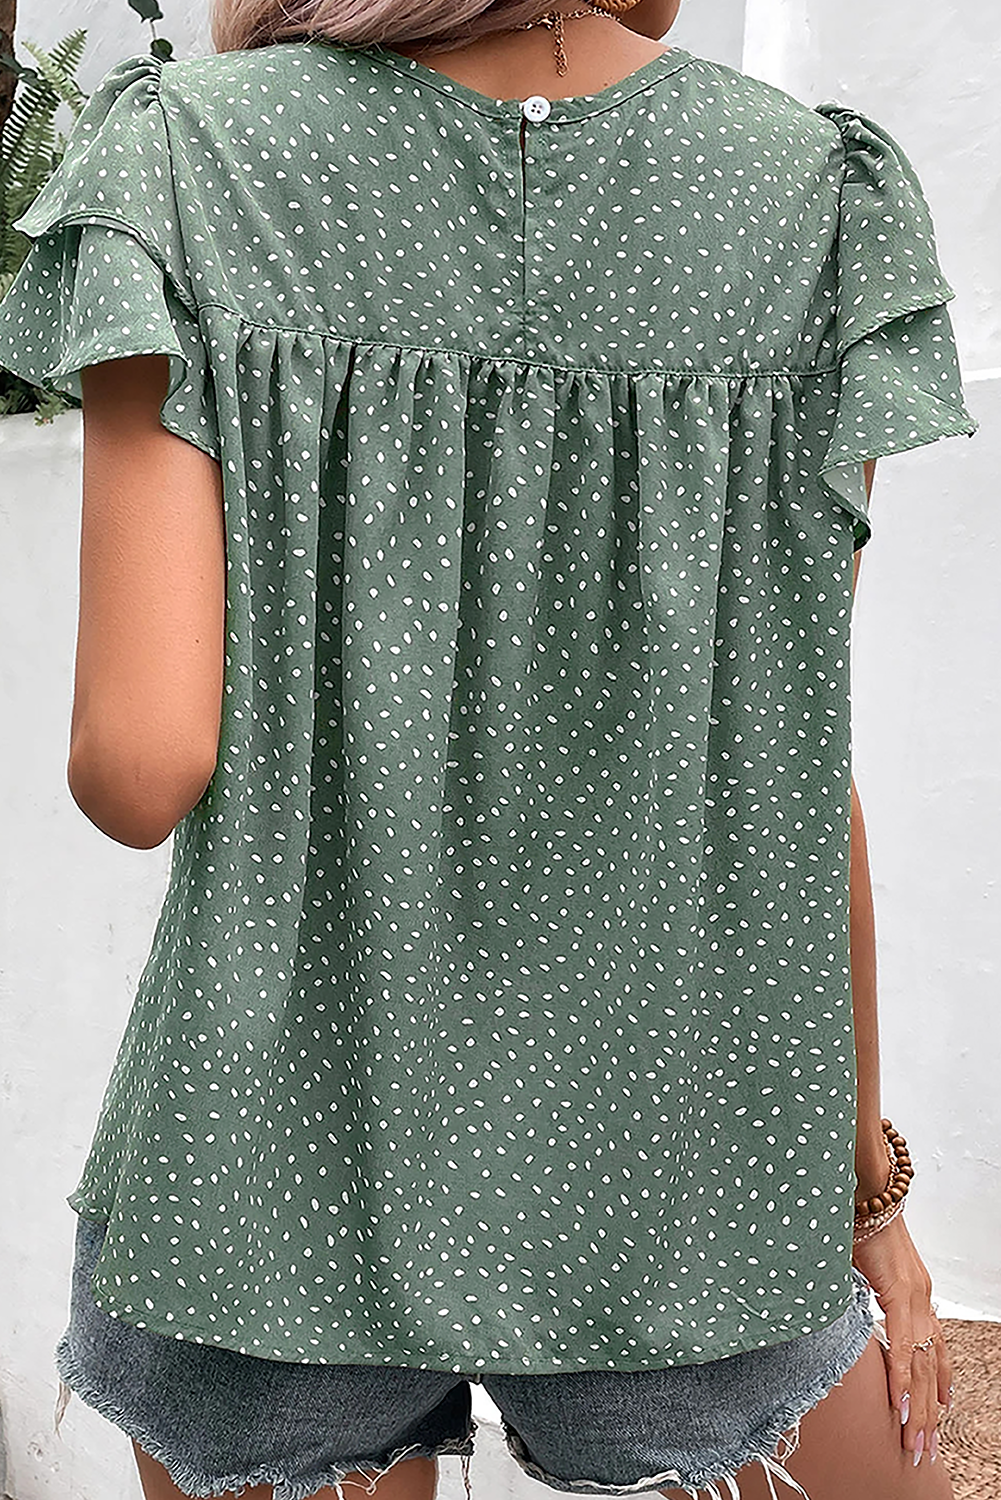 Lovesoft- Laurel Green Dotted Ruffle Sleeve Crew Neck Ruched Blouse: Laurel Green / L / 100%Polyester